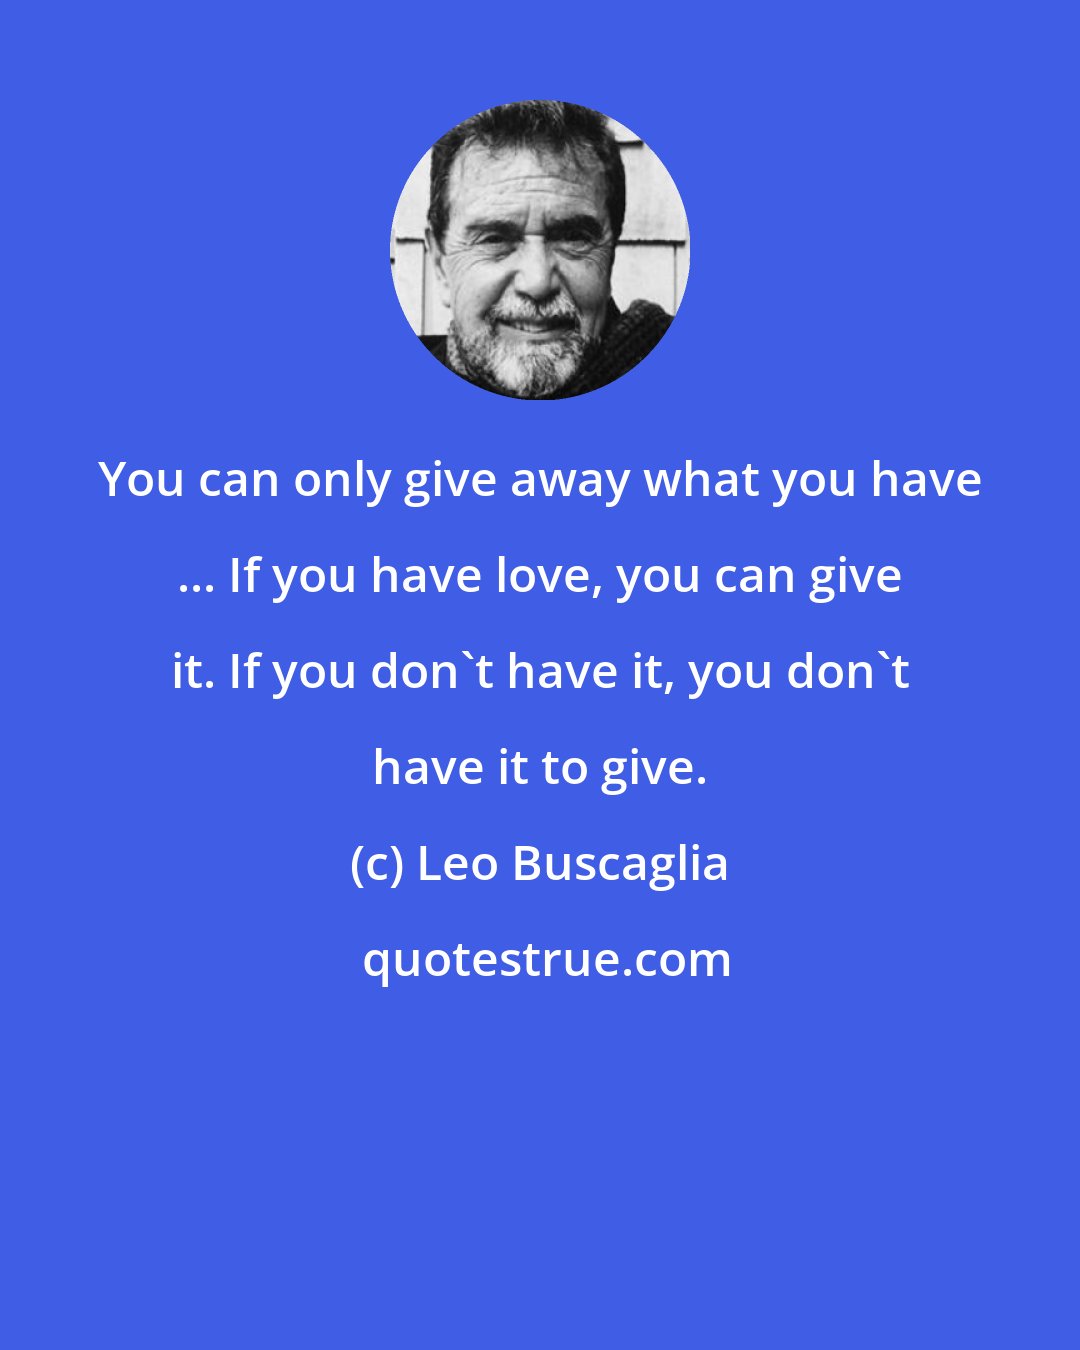 Leo Buscaglia: You can only give away what you have ... If you have love, you can give it. If you don't have it, you don't have it to give.